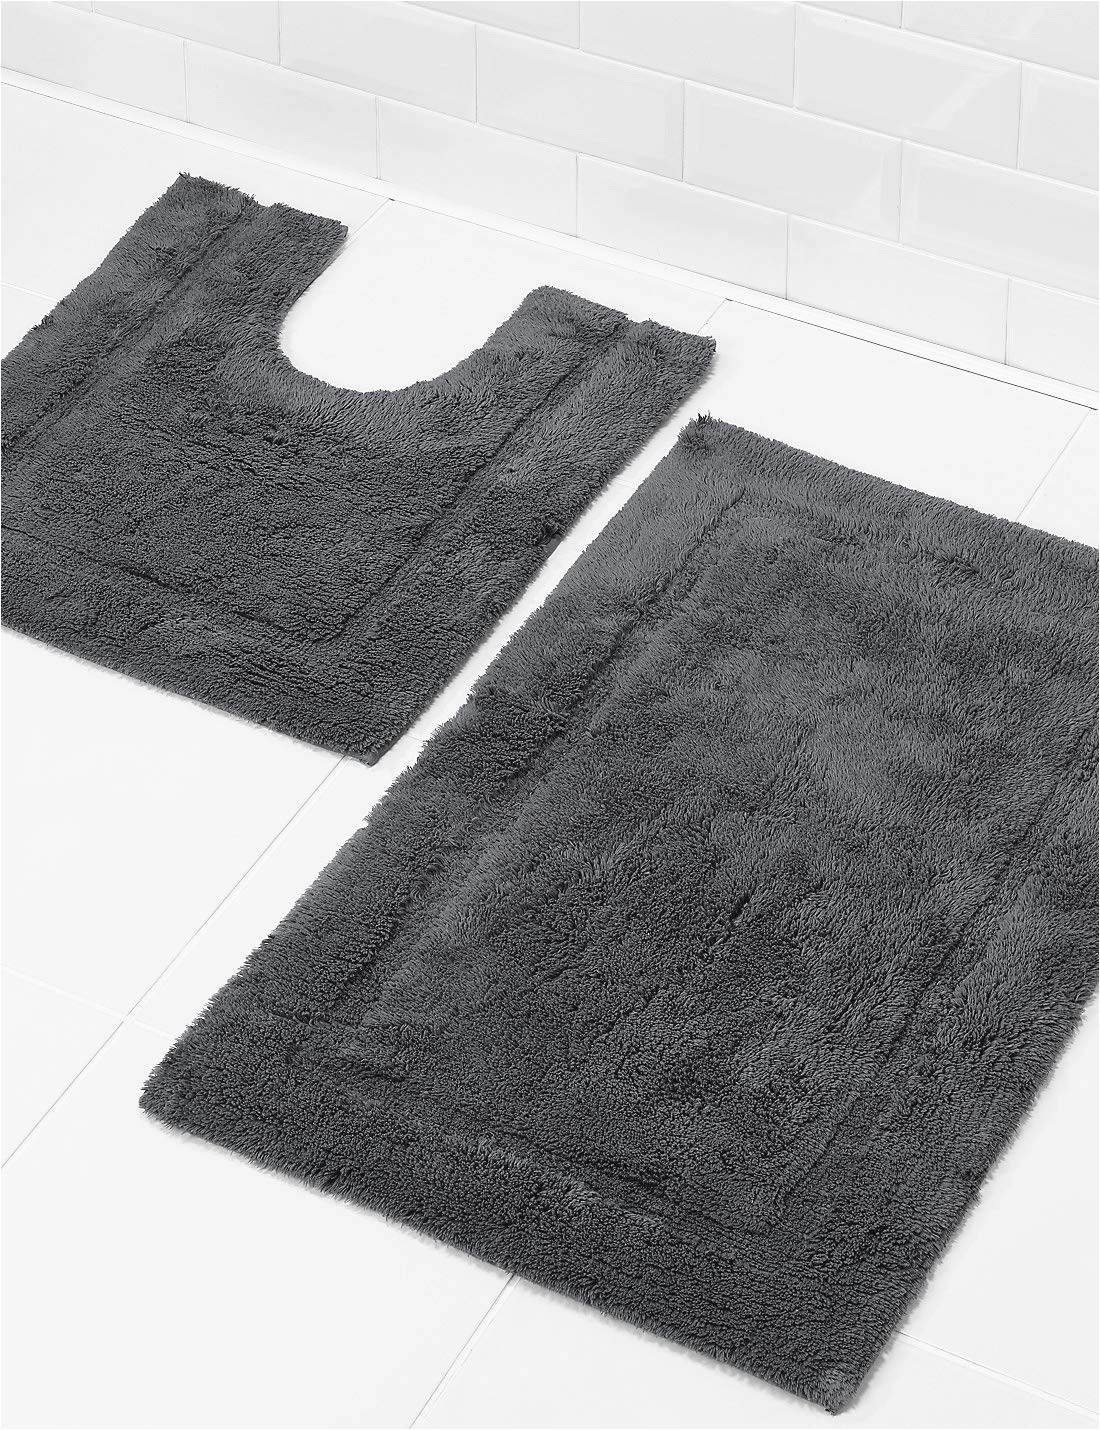 Quick Dry Bathroom Rugs Bravich Quick Dry Rugmasters Luxurious Cotton Machine